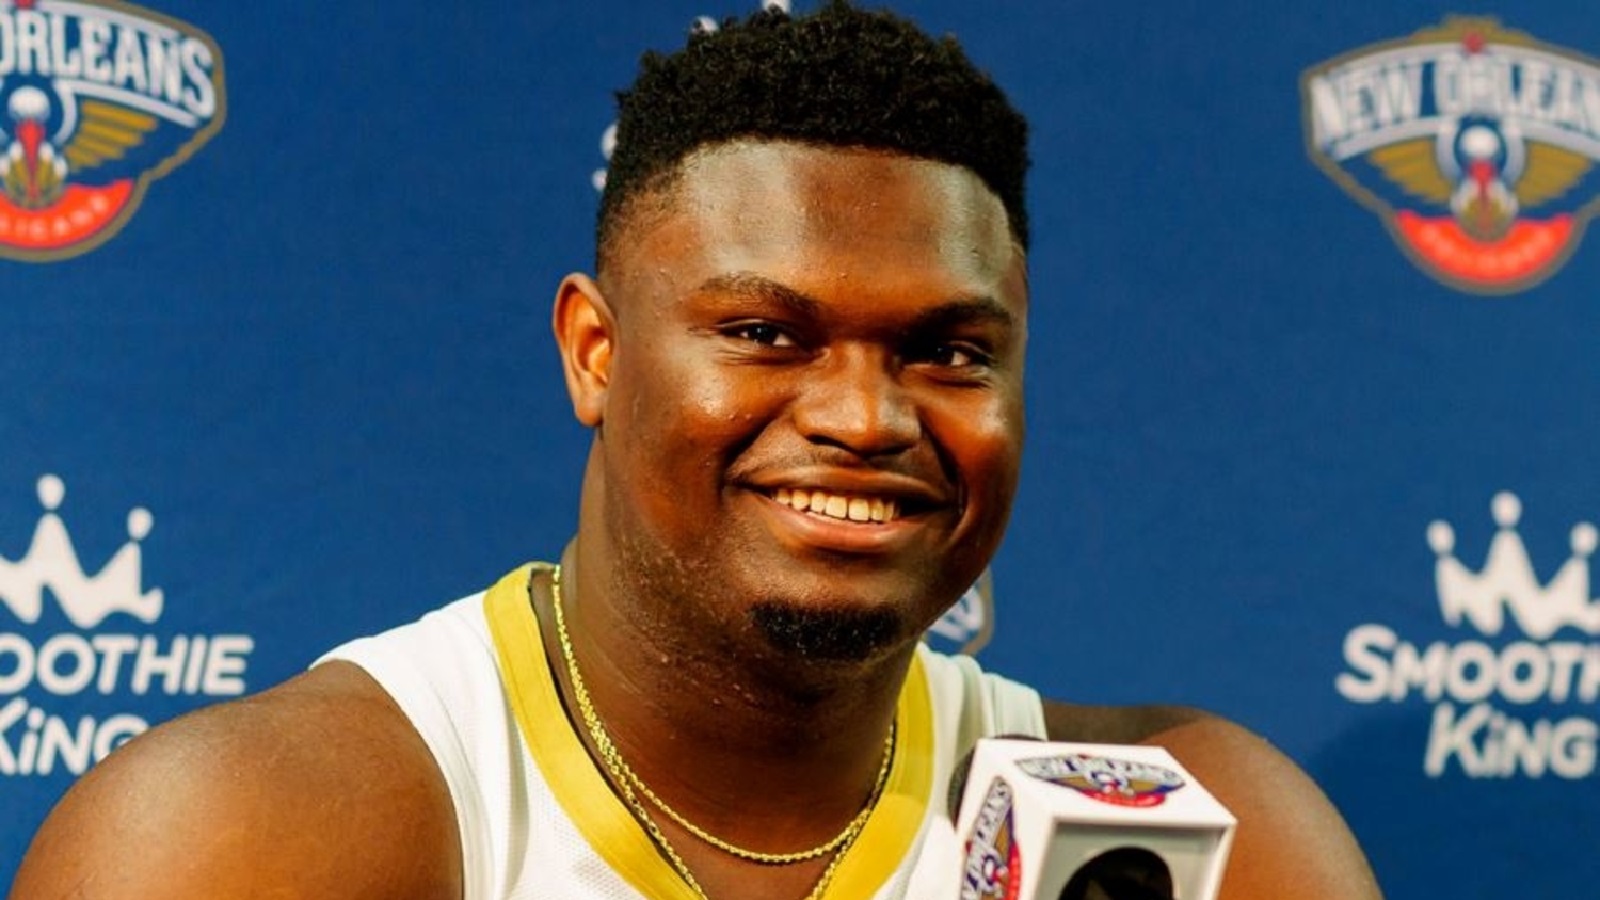 Zion Williamson contract 'weight clause' explained: Why Pelicans added it  and possible consequences - The Athletic